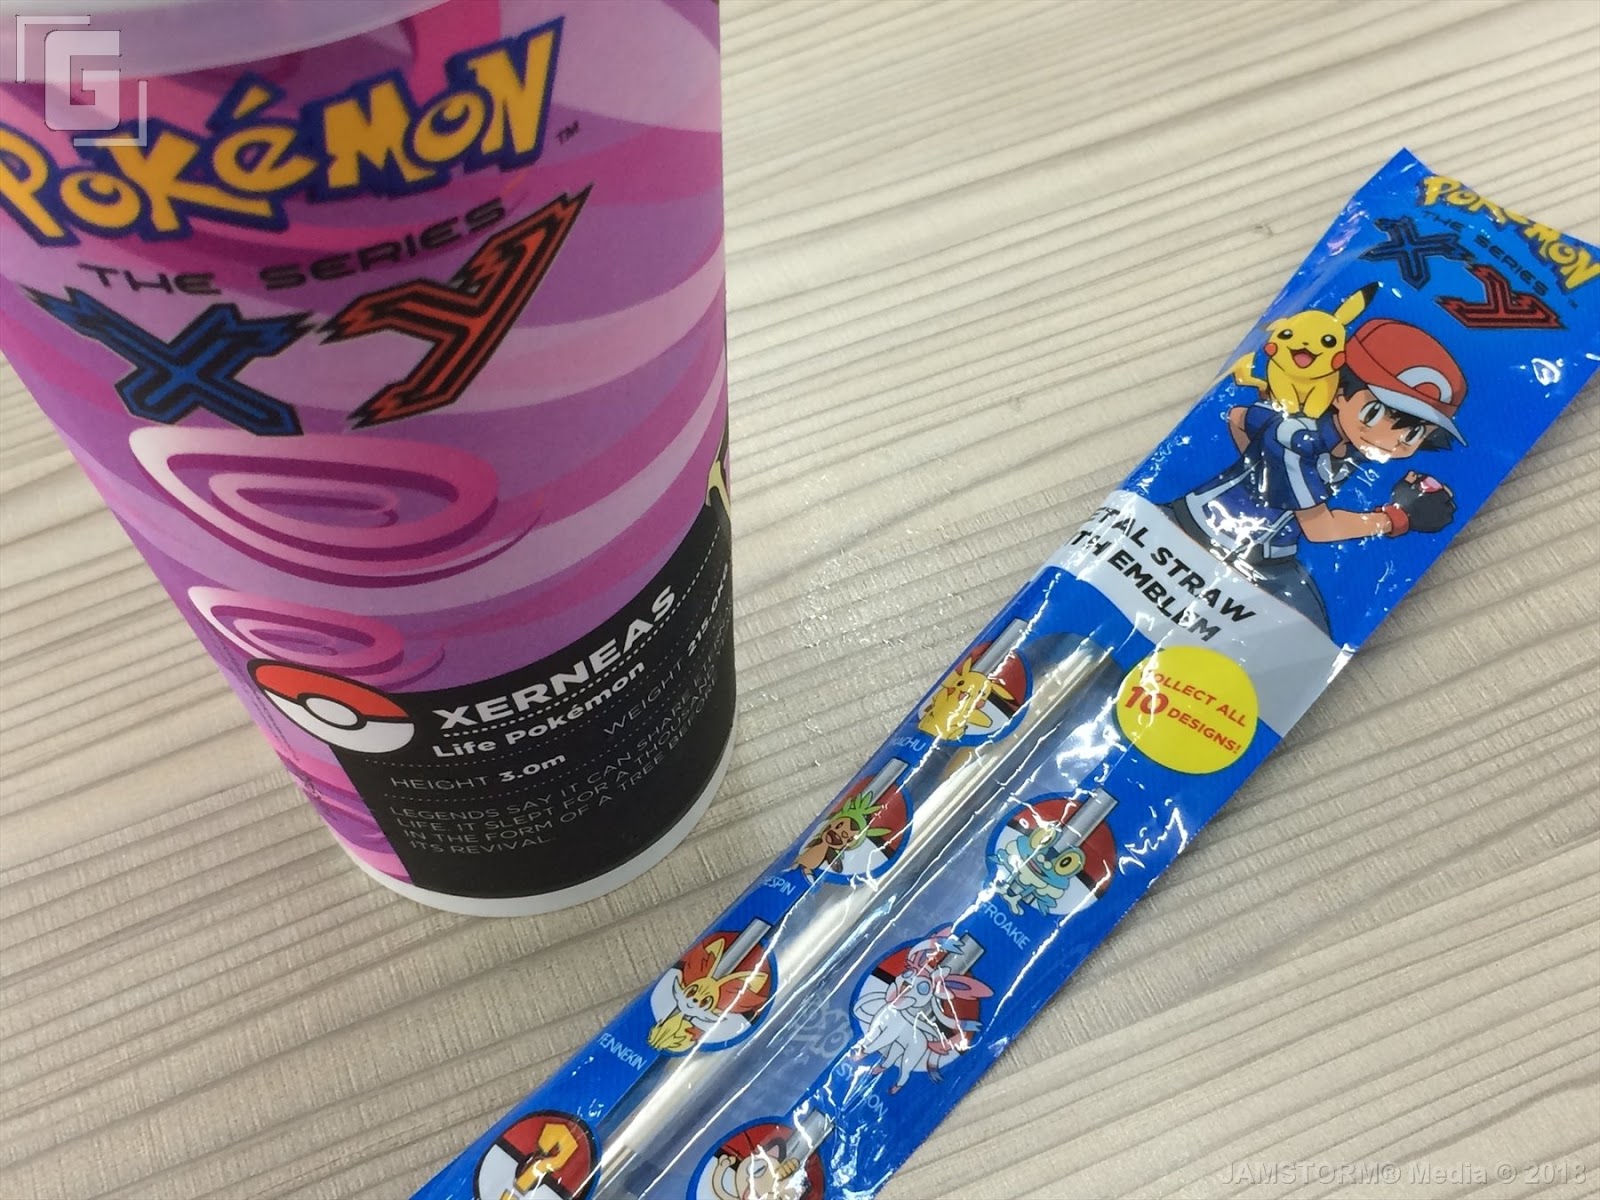 UNBOXING 7-Eleven Philippines Limited Edition Pokémon Metal Straws 